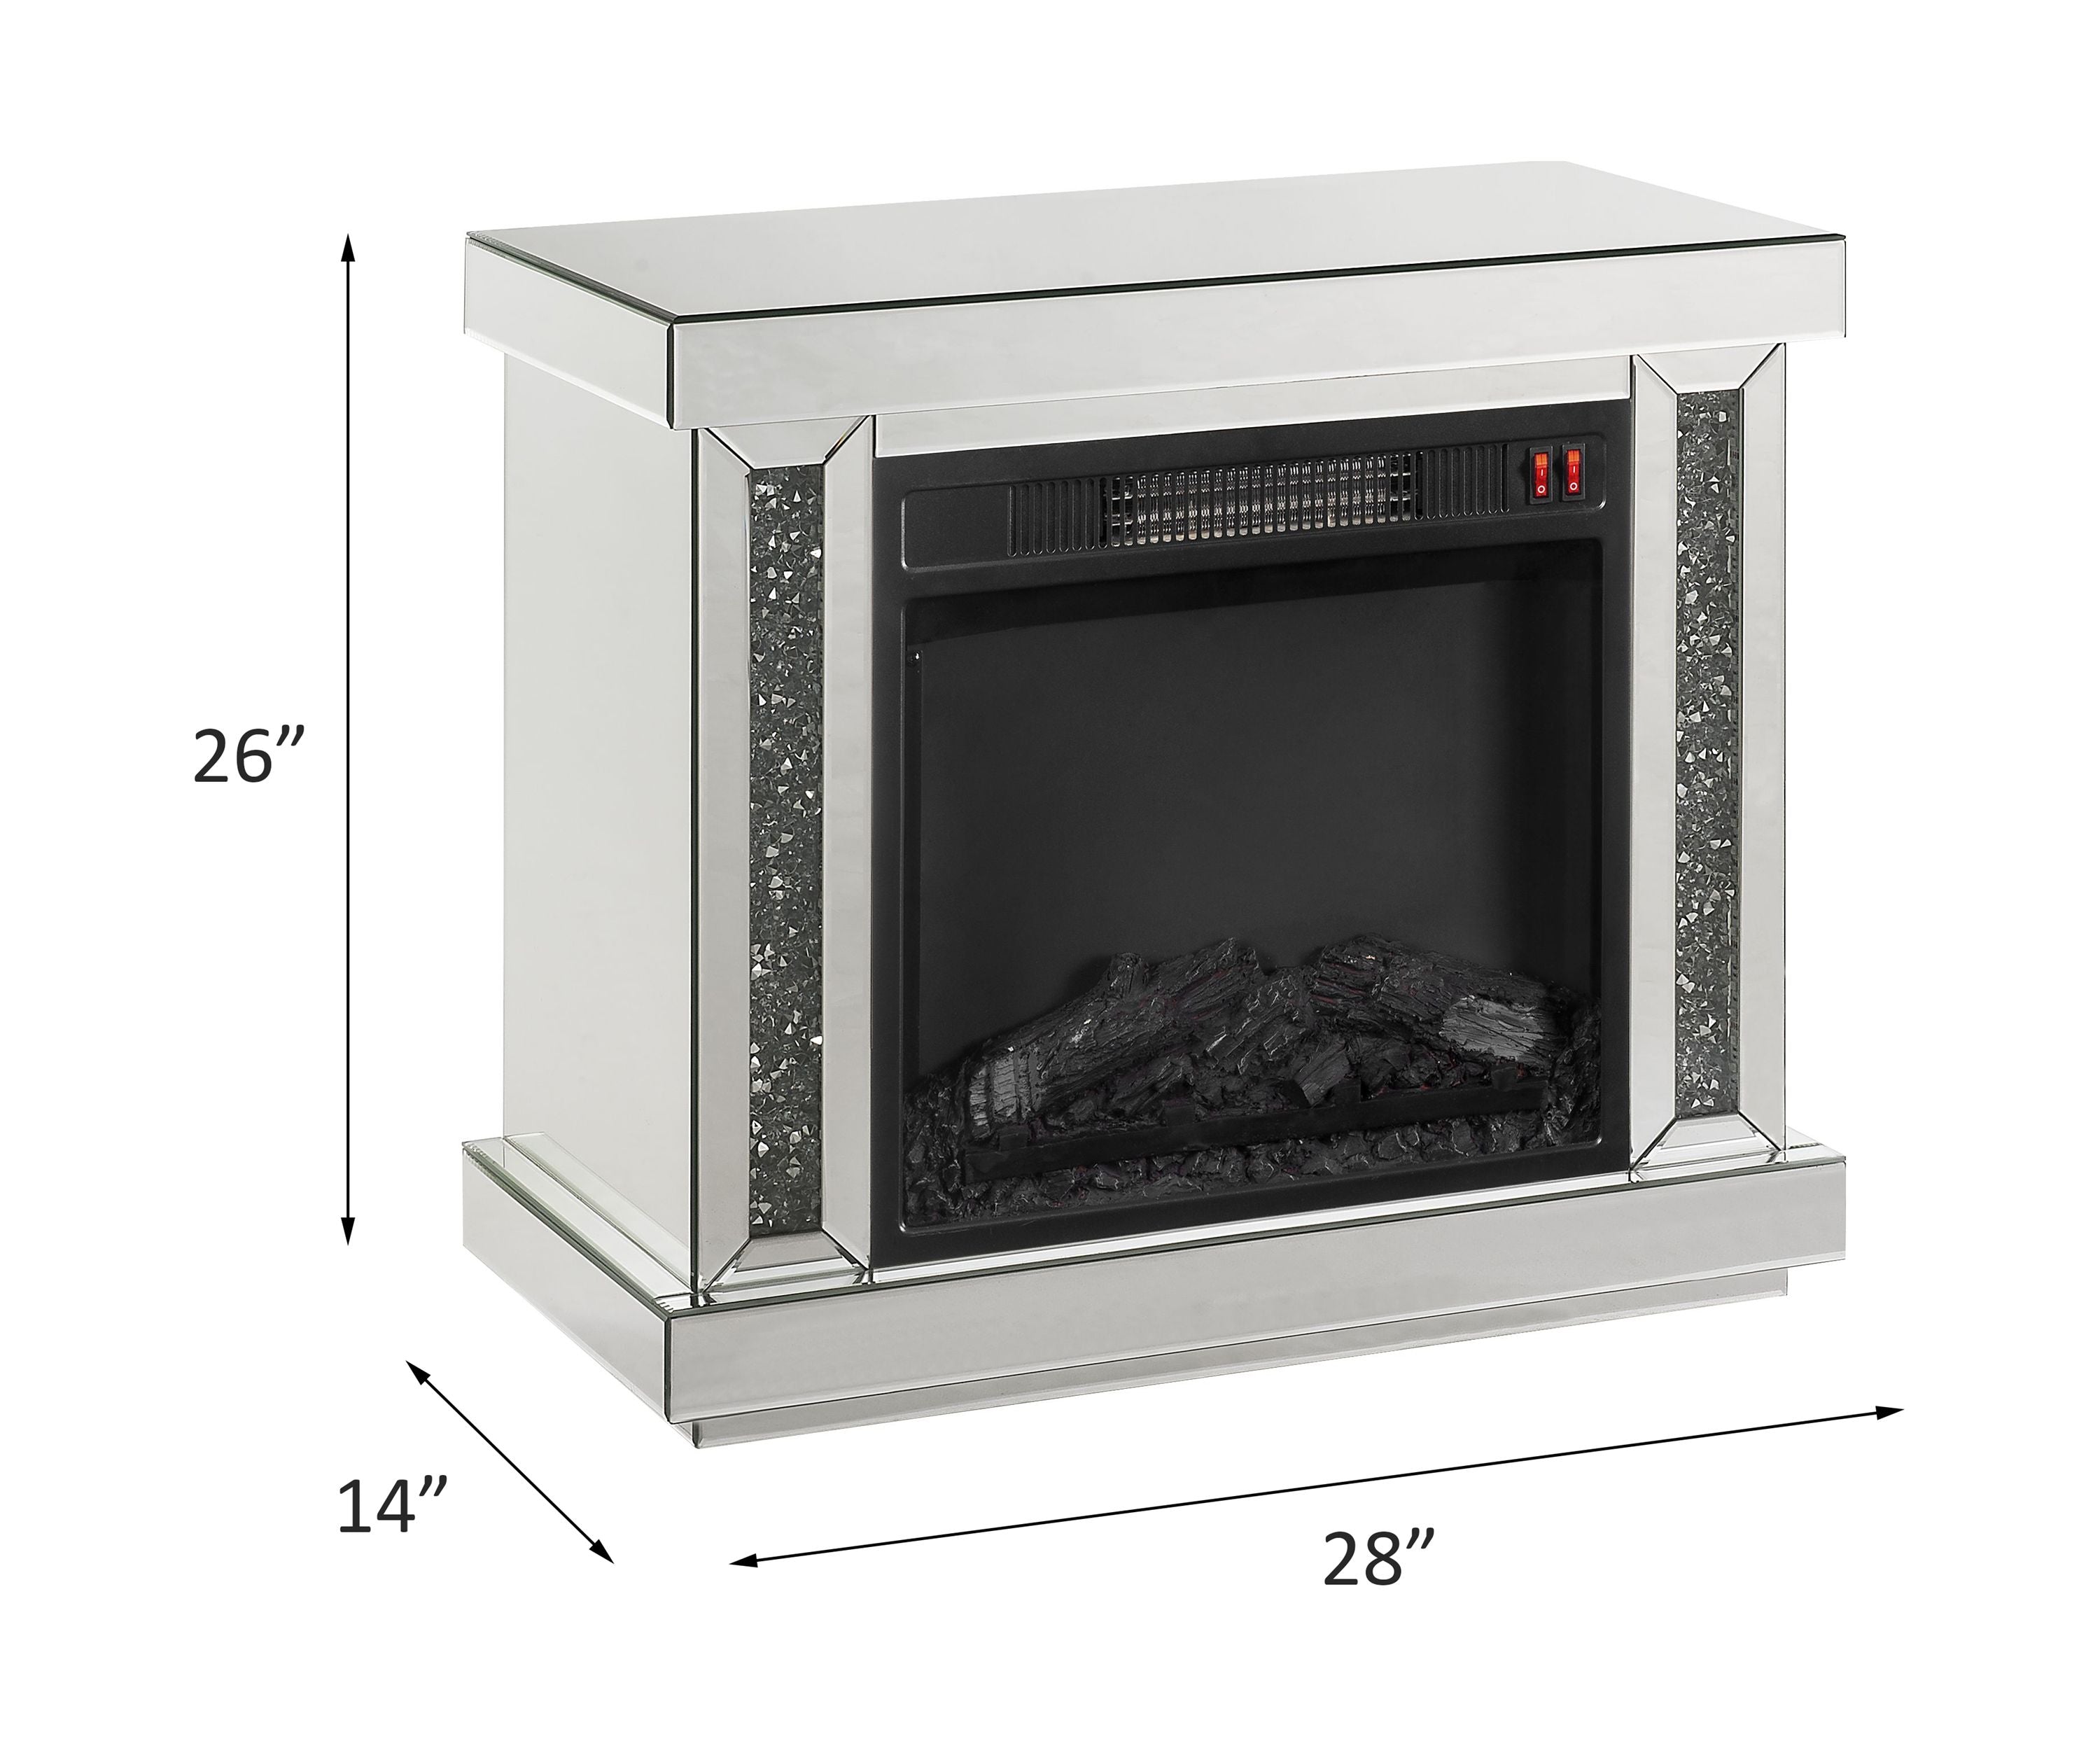 Noralie Fireplace - 90864